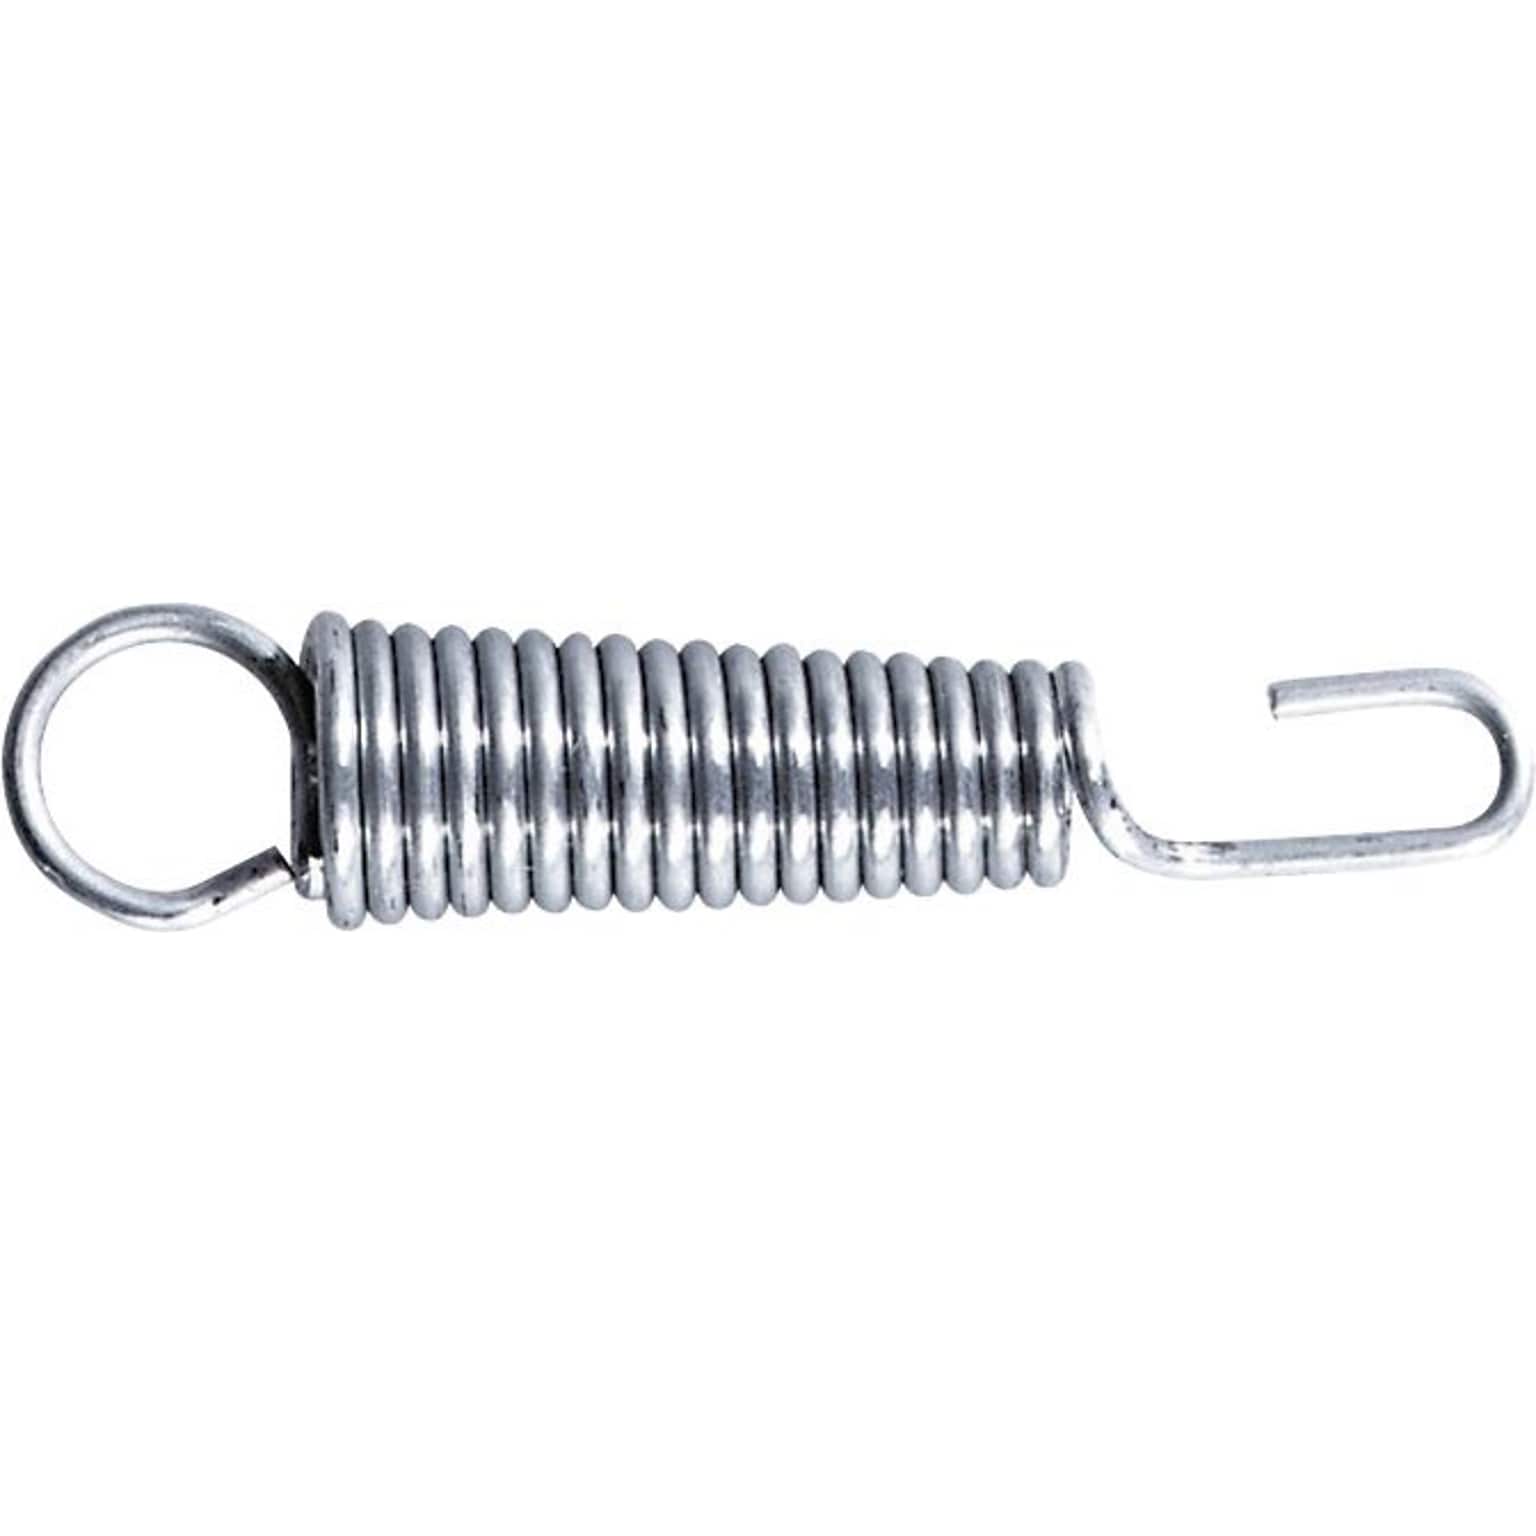 Irwin® Vise-Grip® Replacement Spring, For Models 5WR, 6LN, 6BN, 6R, 6SP, 5/Pack